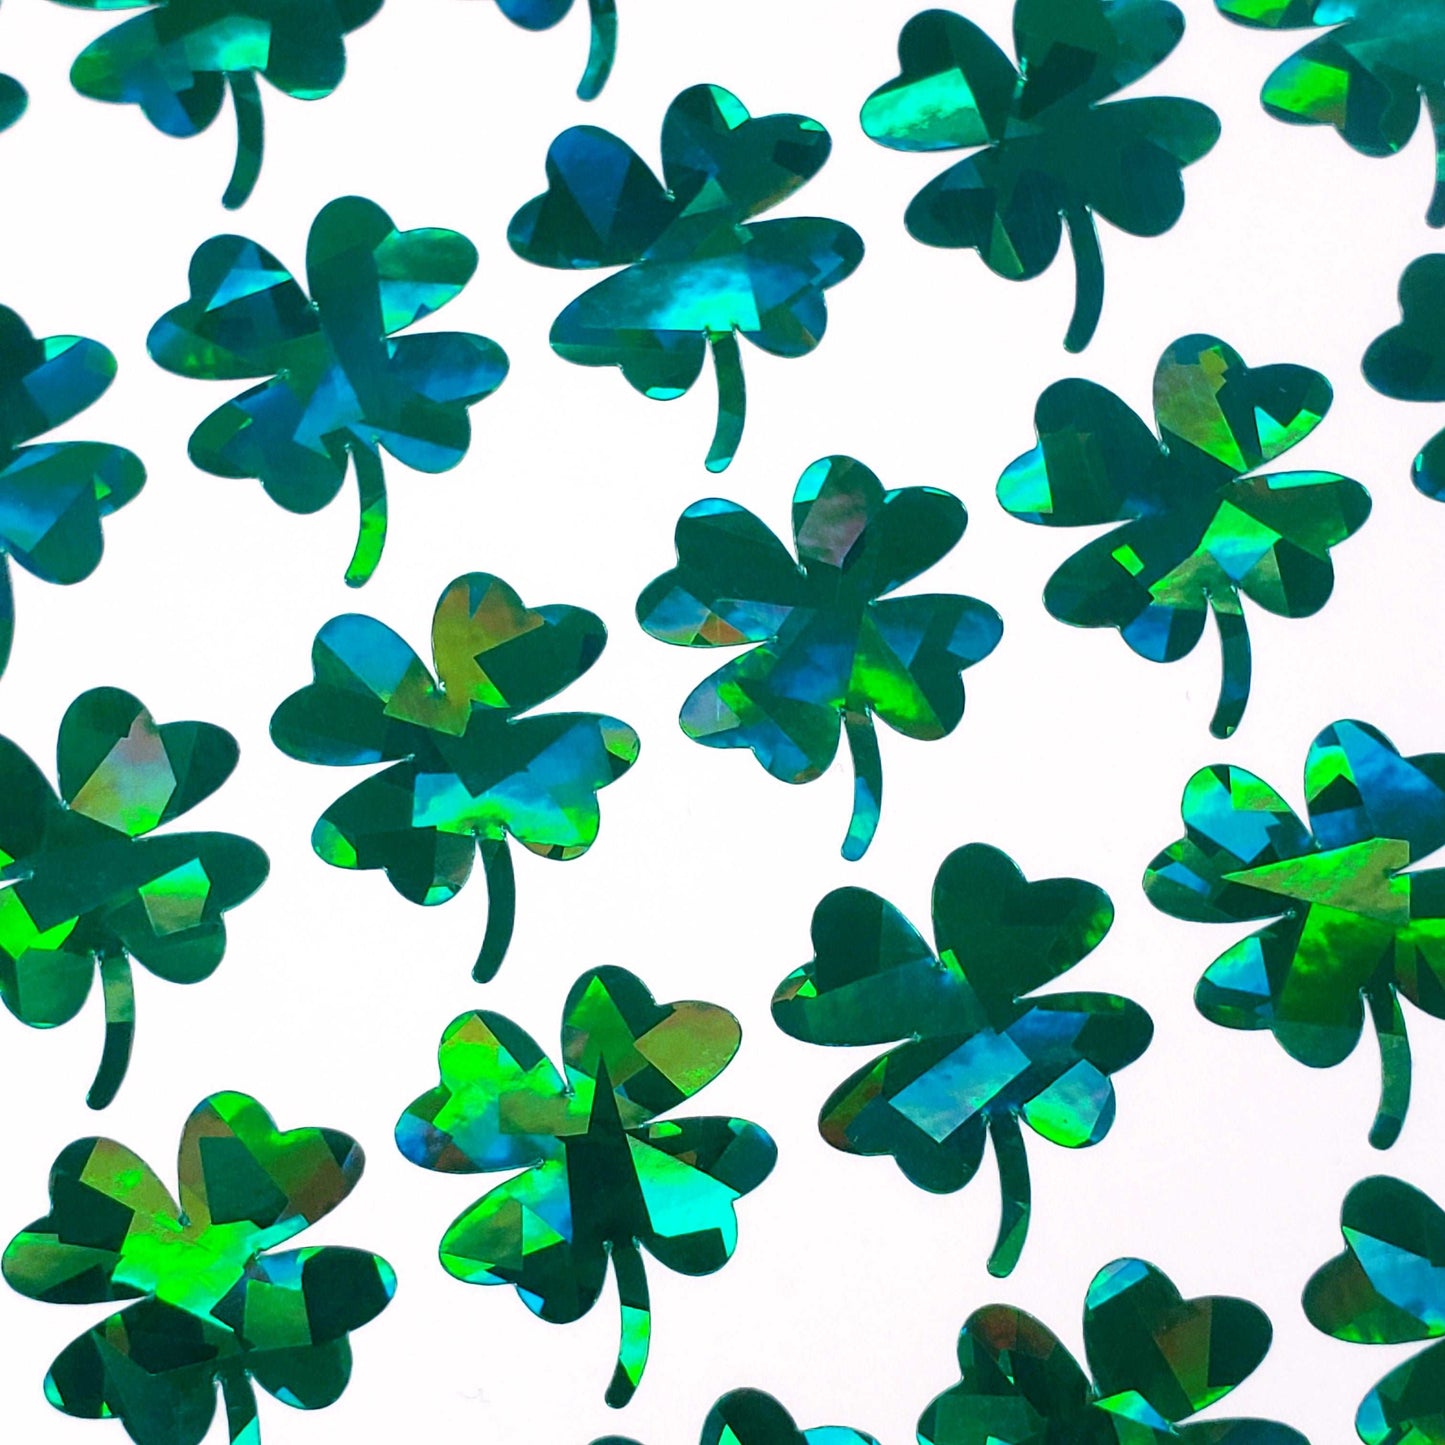 Lucky Clover Stickers, set of 48